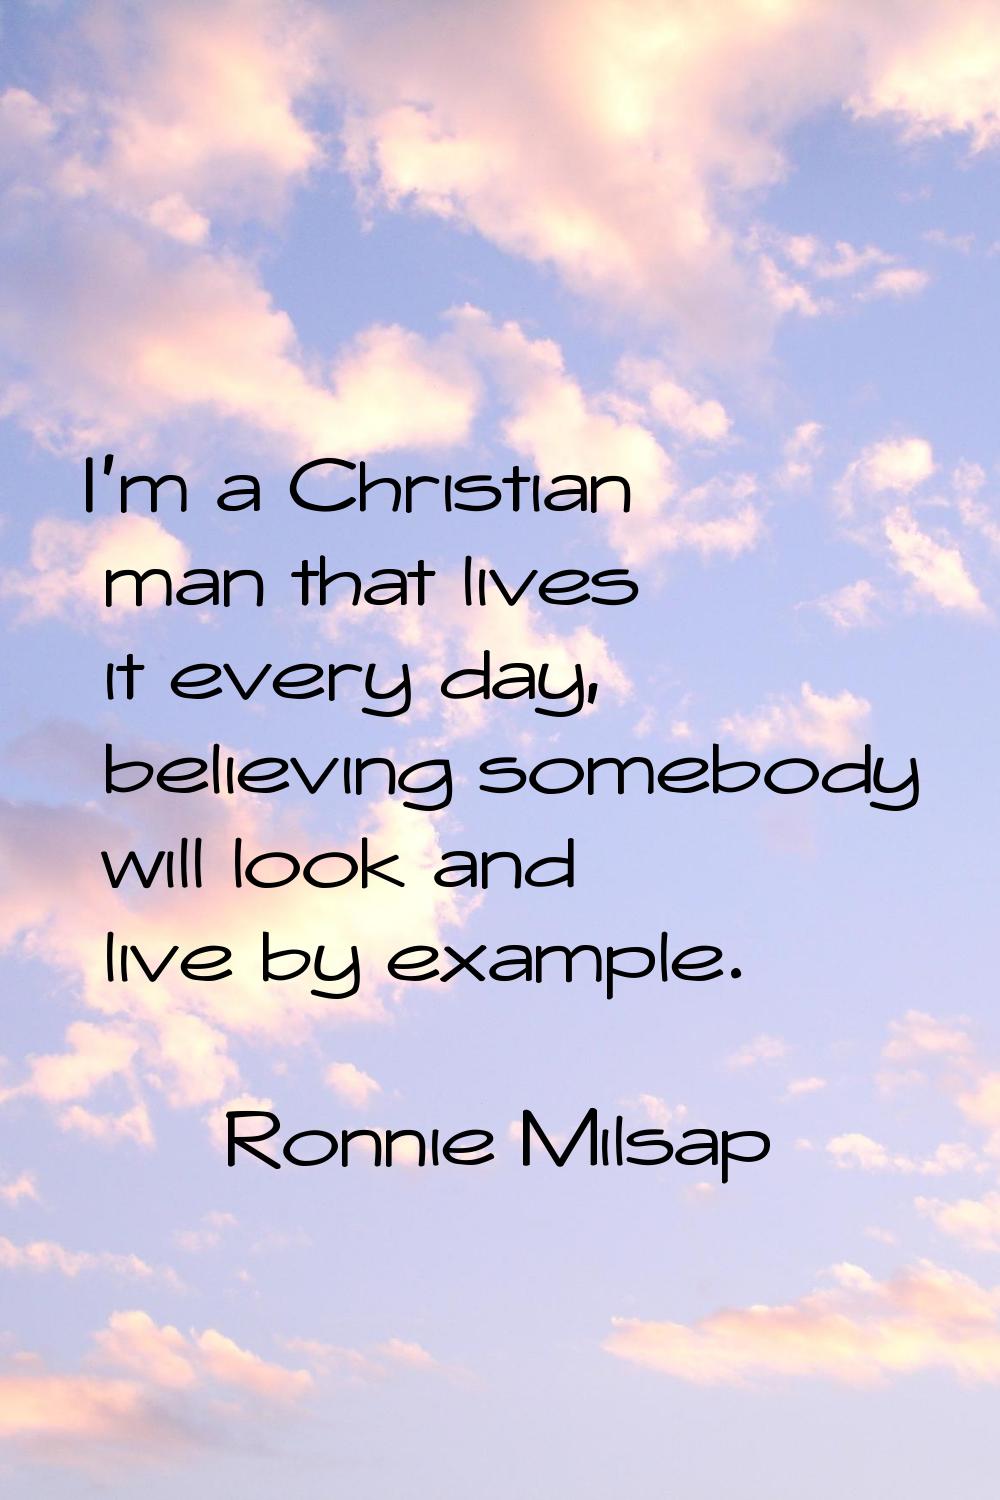 I'm a Christian man that lives it every day, believing somebody will look and live by example.